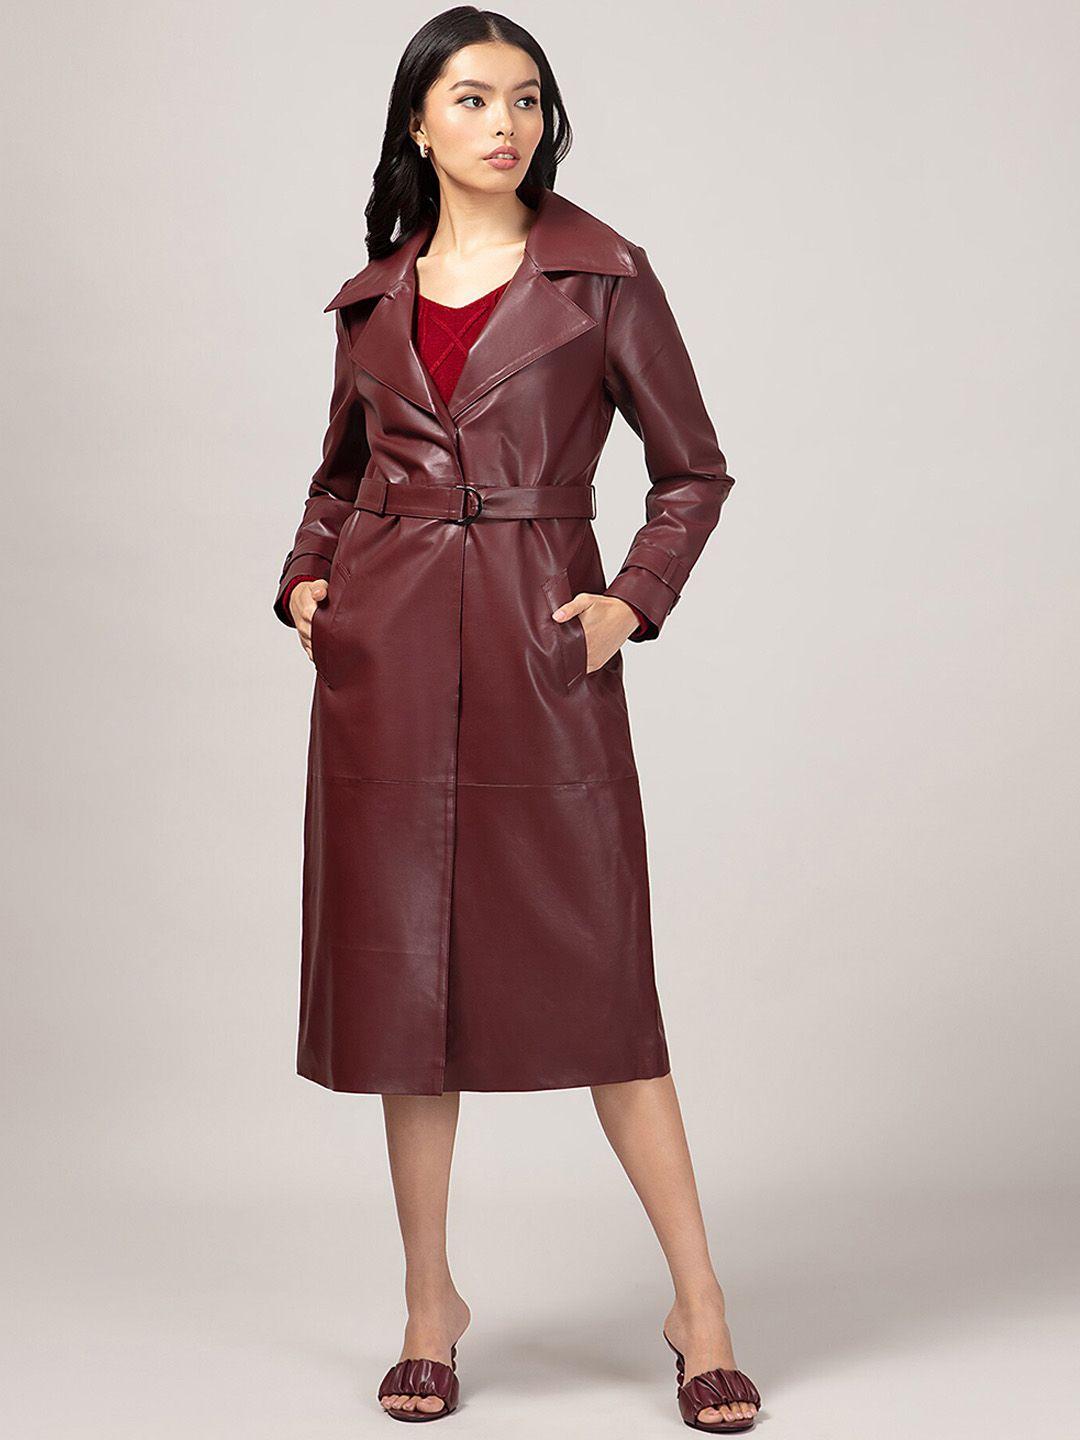 20dresses women maroon solid faux leather overcoats